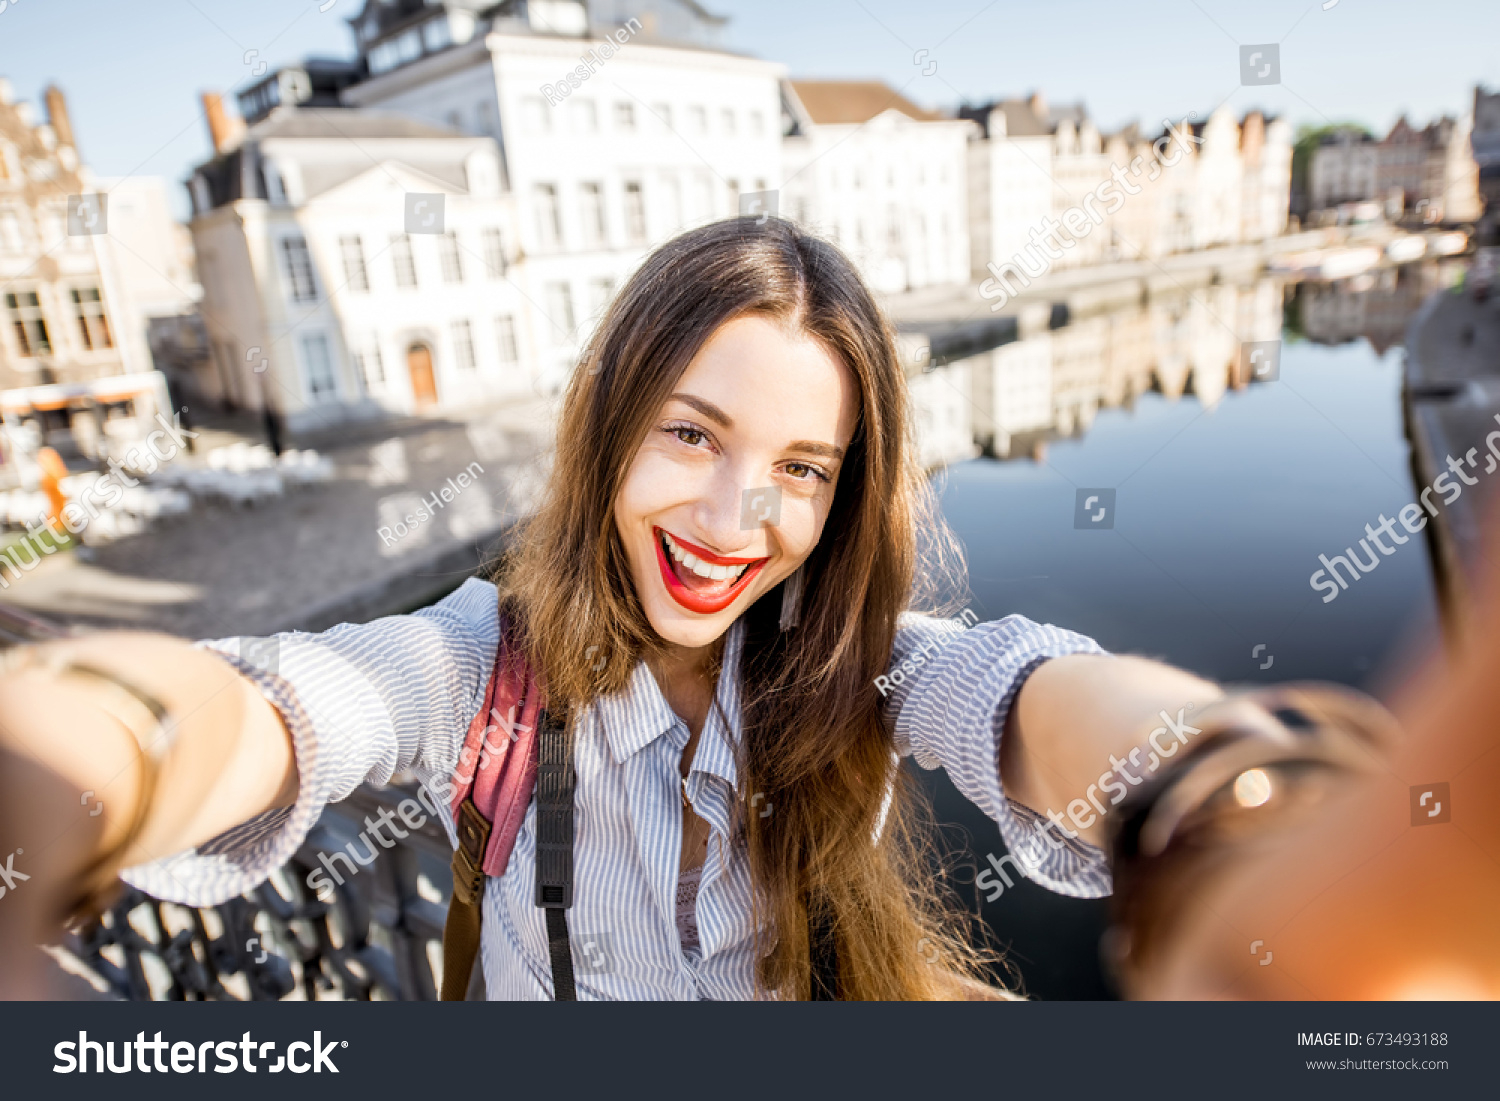 Young woman tourist making selfie photo standing on the bridge with beautiful view on Gent city in Belgium #673493188